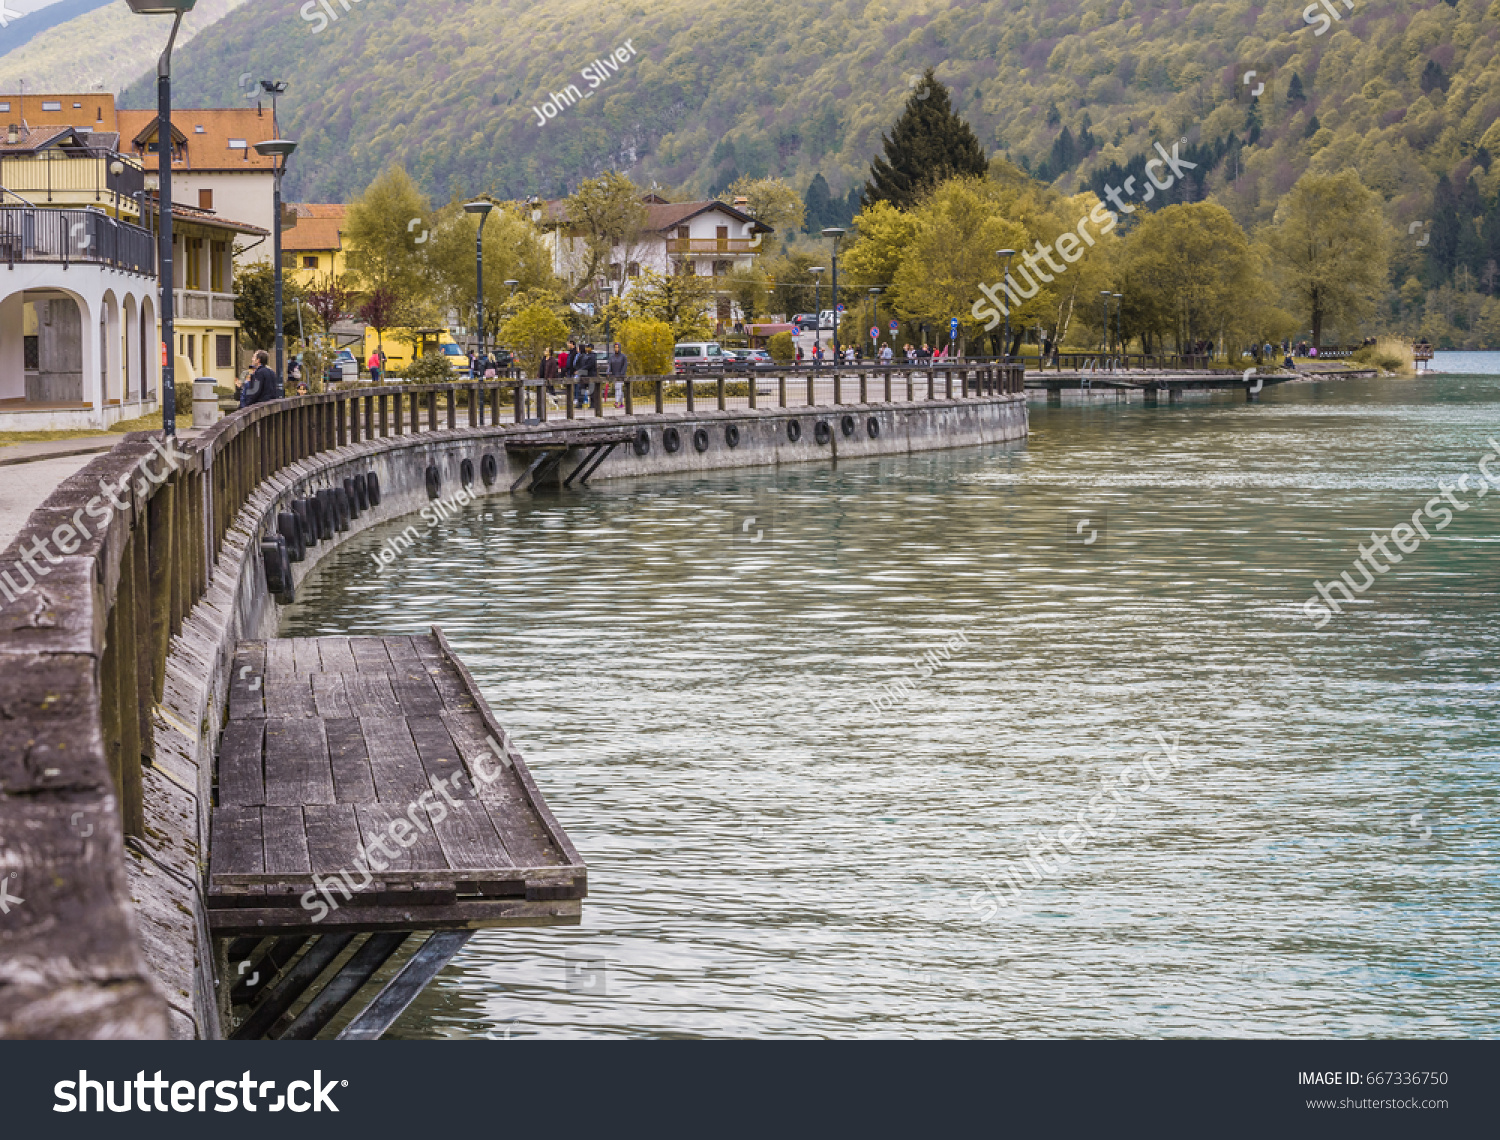 view of the Barcis city on the lakeside surrounding mountains against a dramatic cloudy blue sky background in Valcellina, Pordenone, Italy
 #667336750